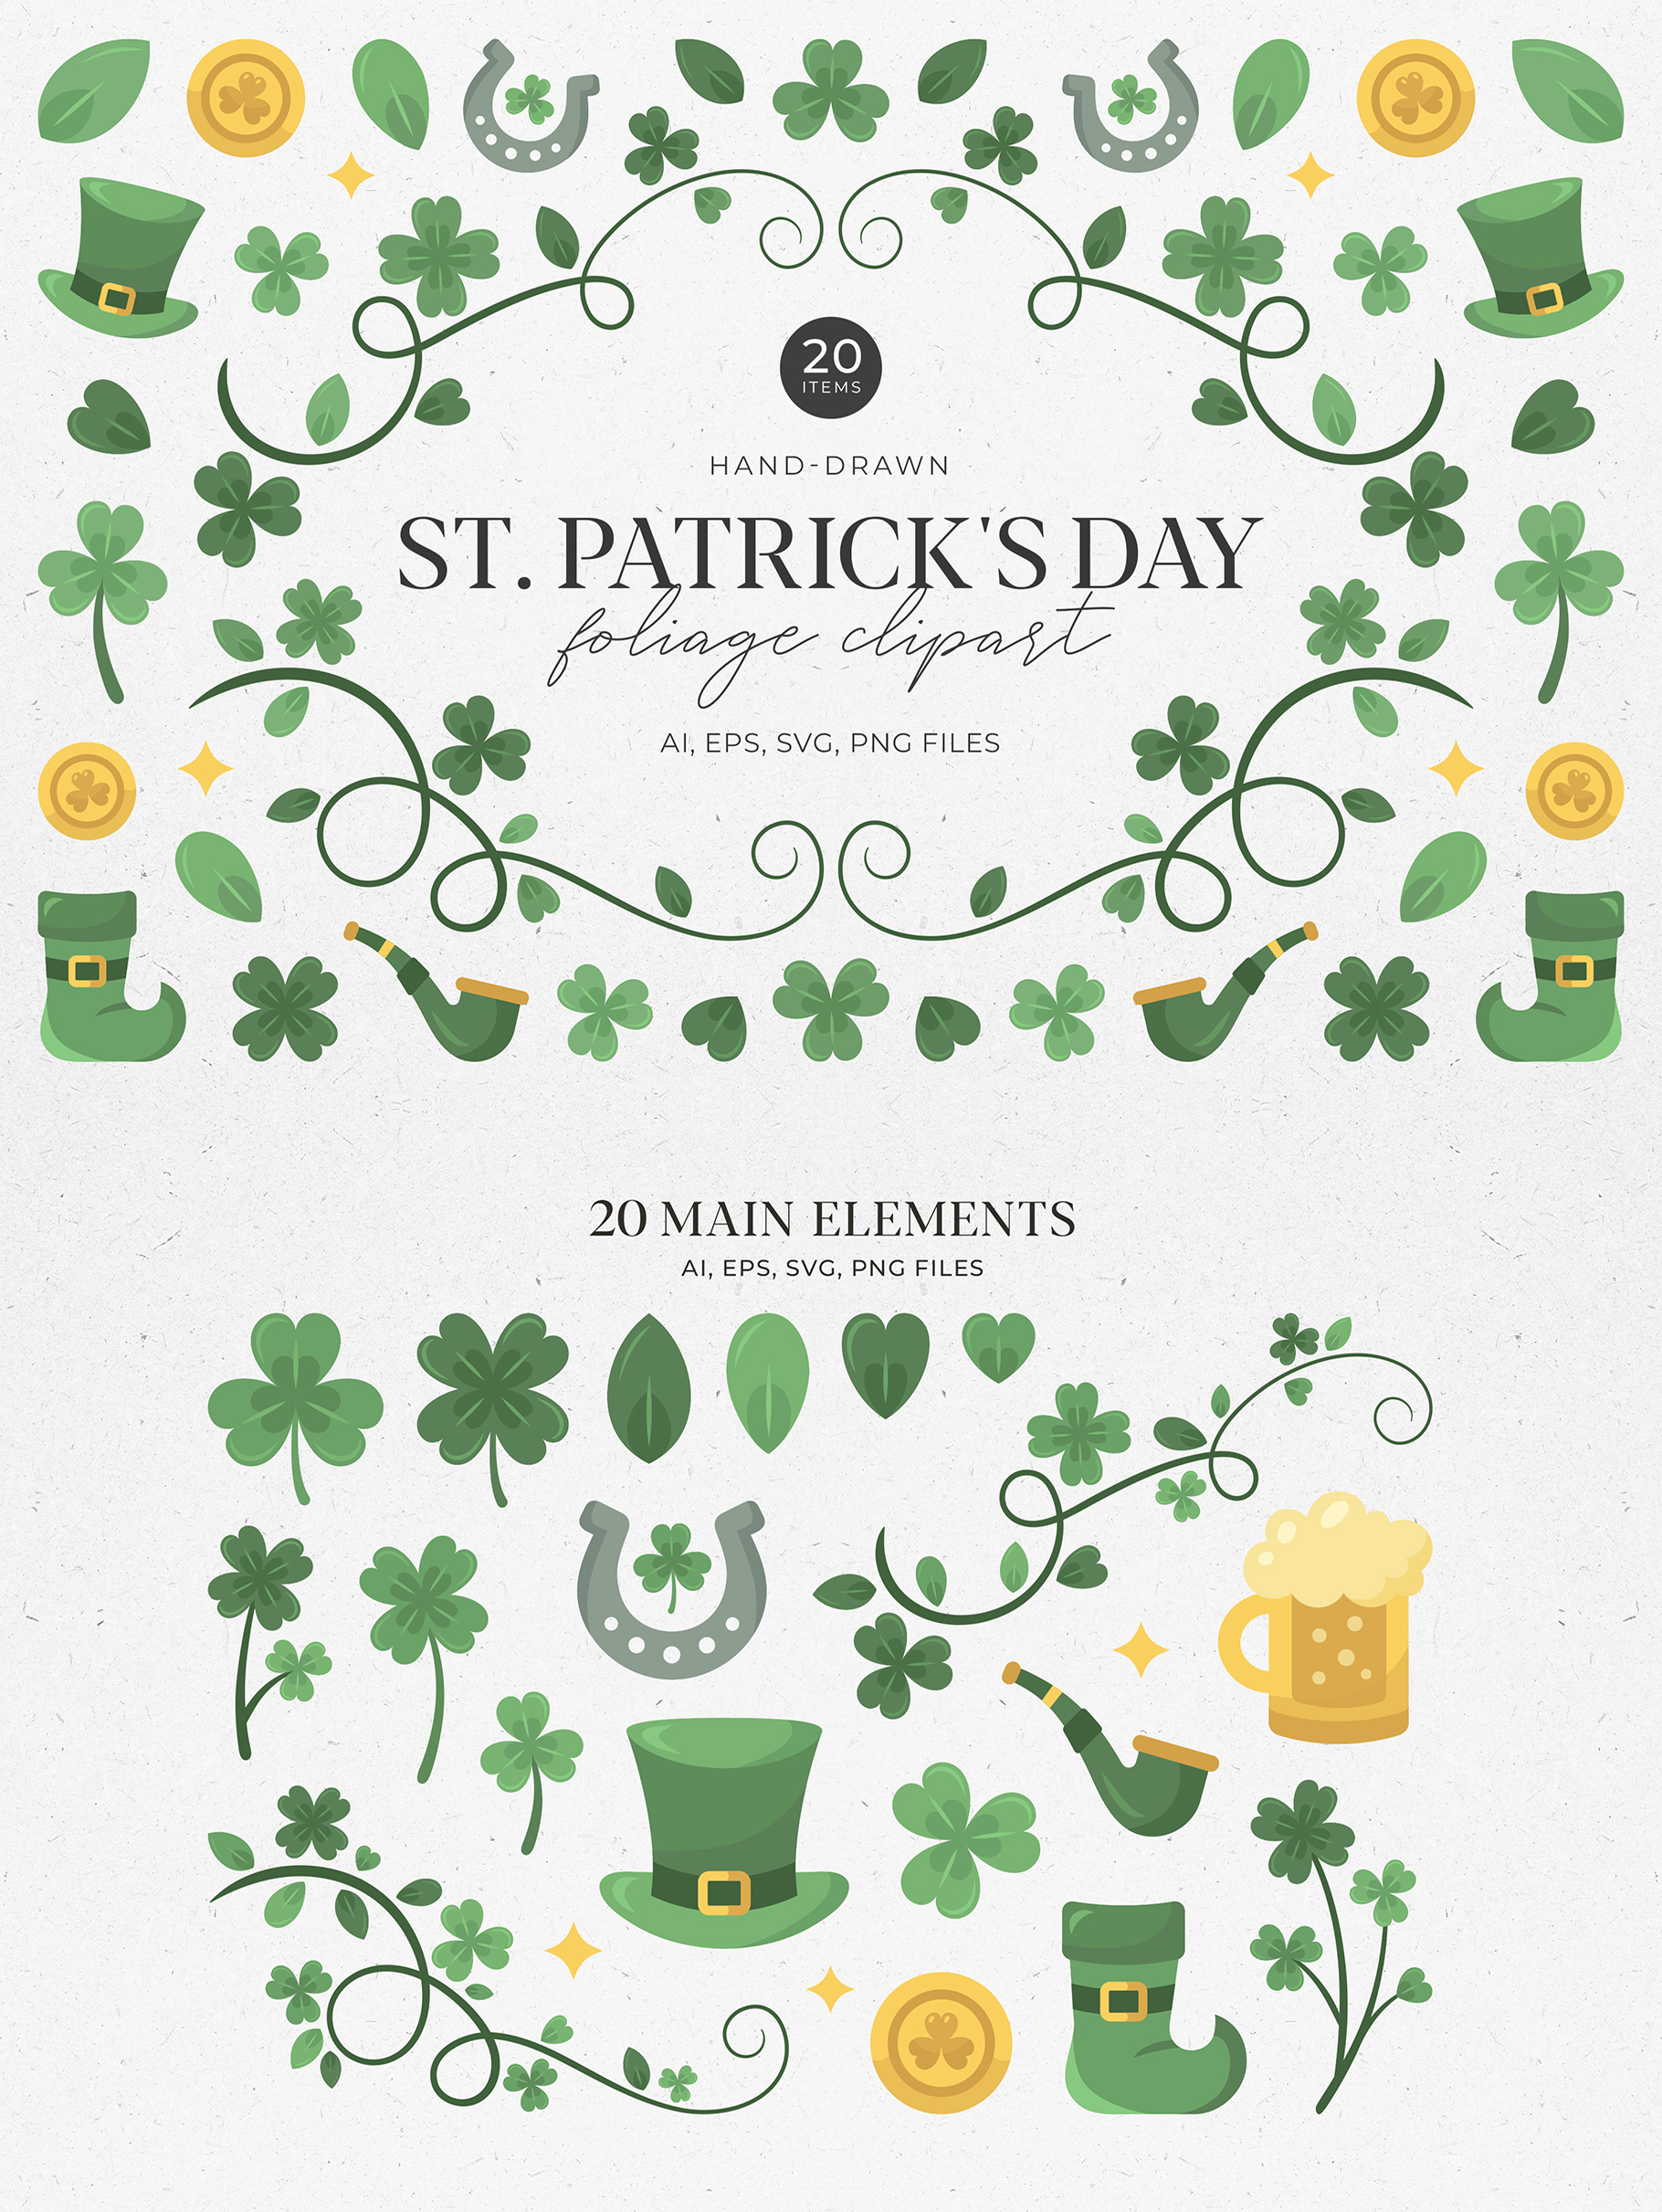 St. Patrick's Day Foliage Graphic Pack in AI EPS PNG SVG